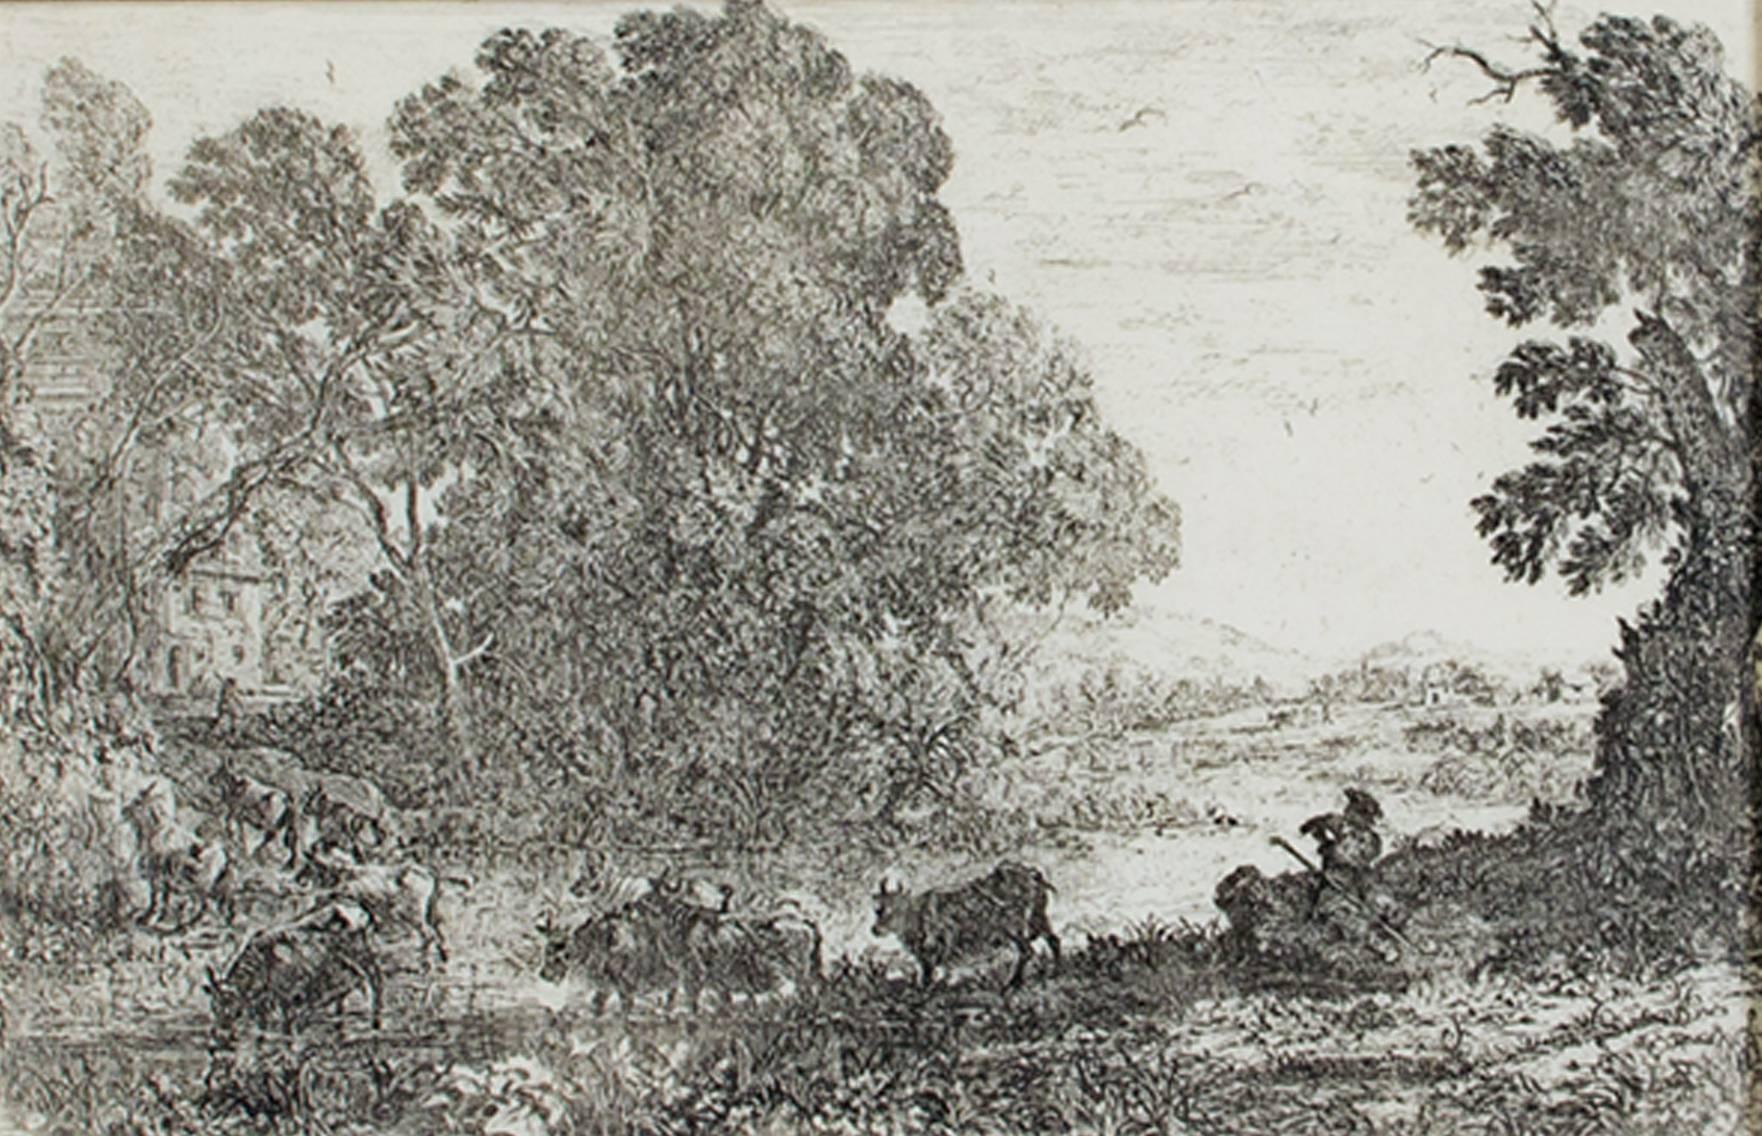 Claude Lorrain Landscape Print - 17th century etching black and white landscape scene forest trees cattle